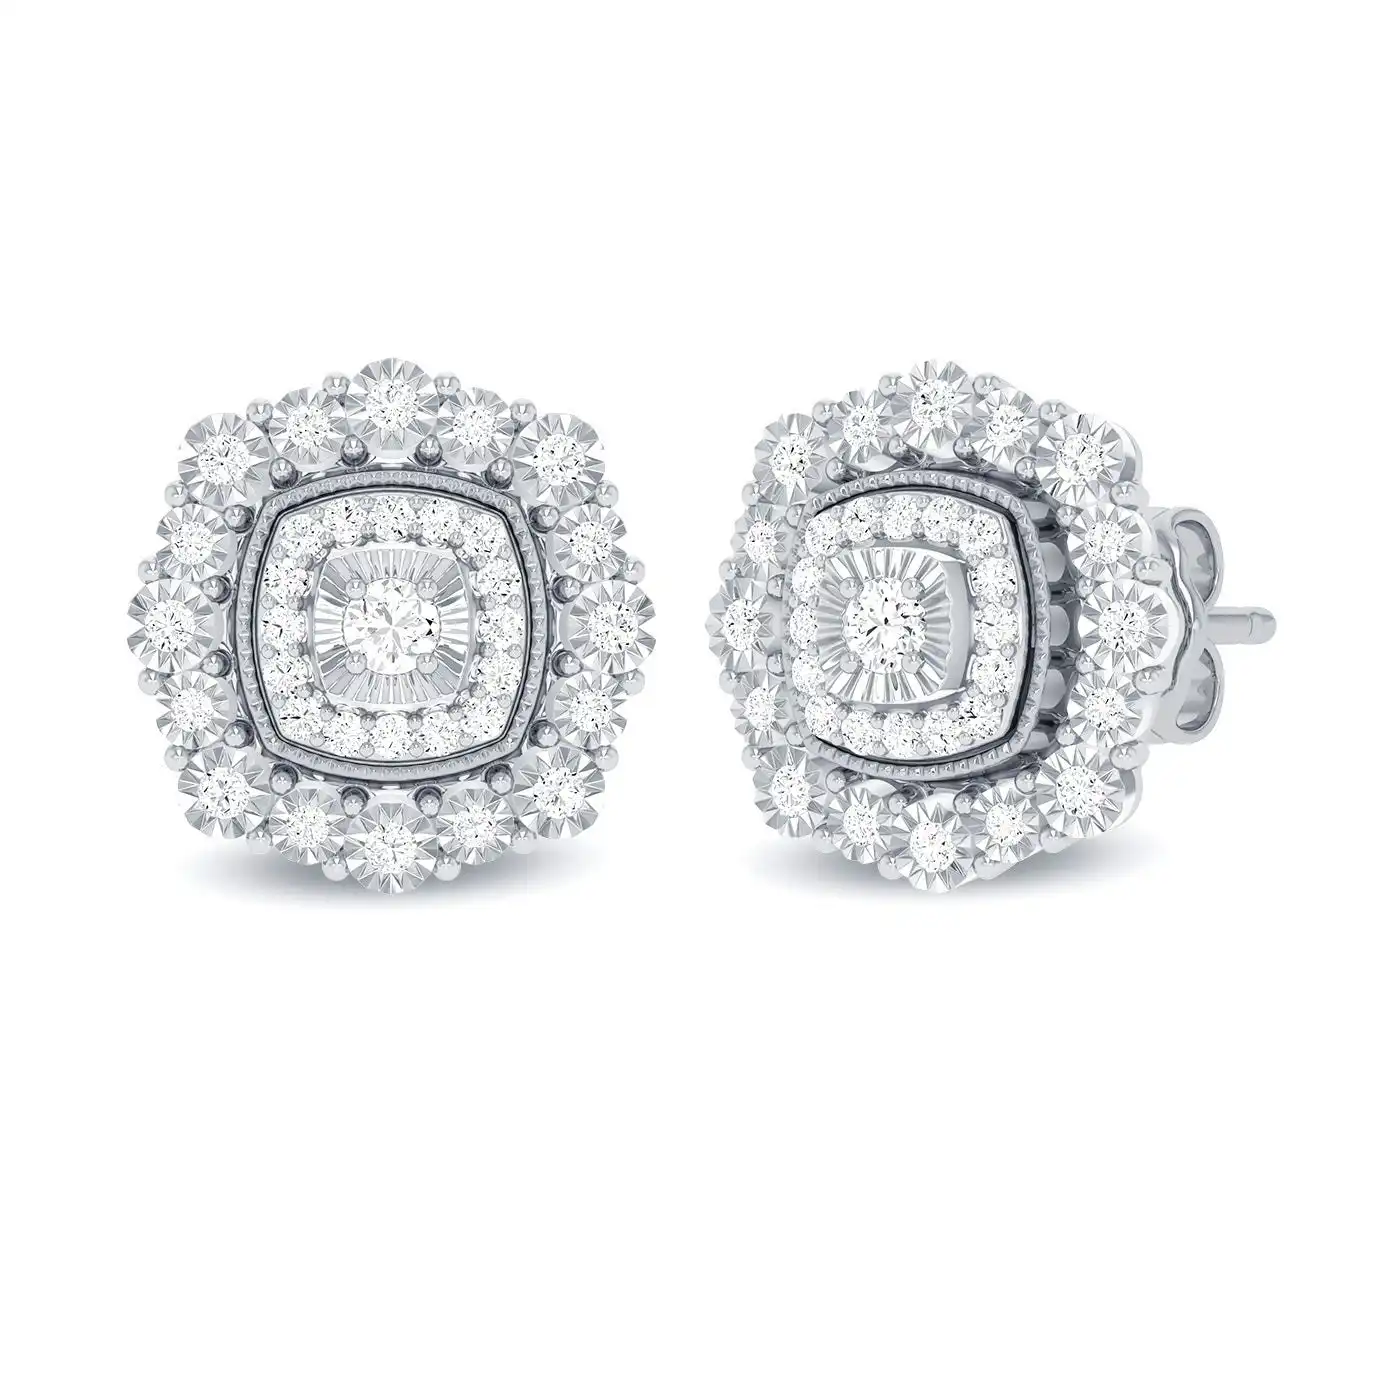 Miracle Little Halo Earrings with 0.15ct of Diamonds in 9ct White Gold